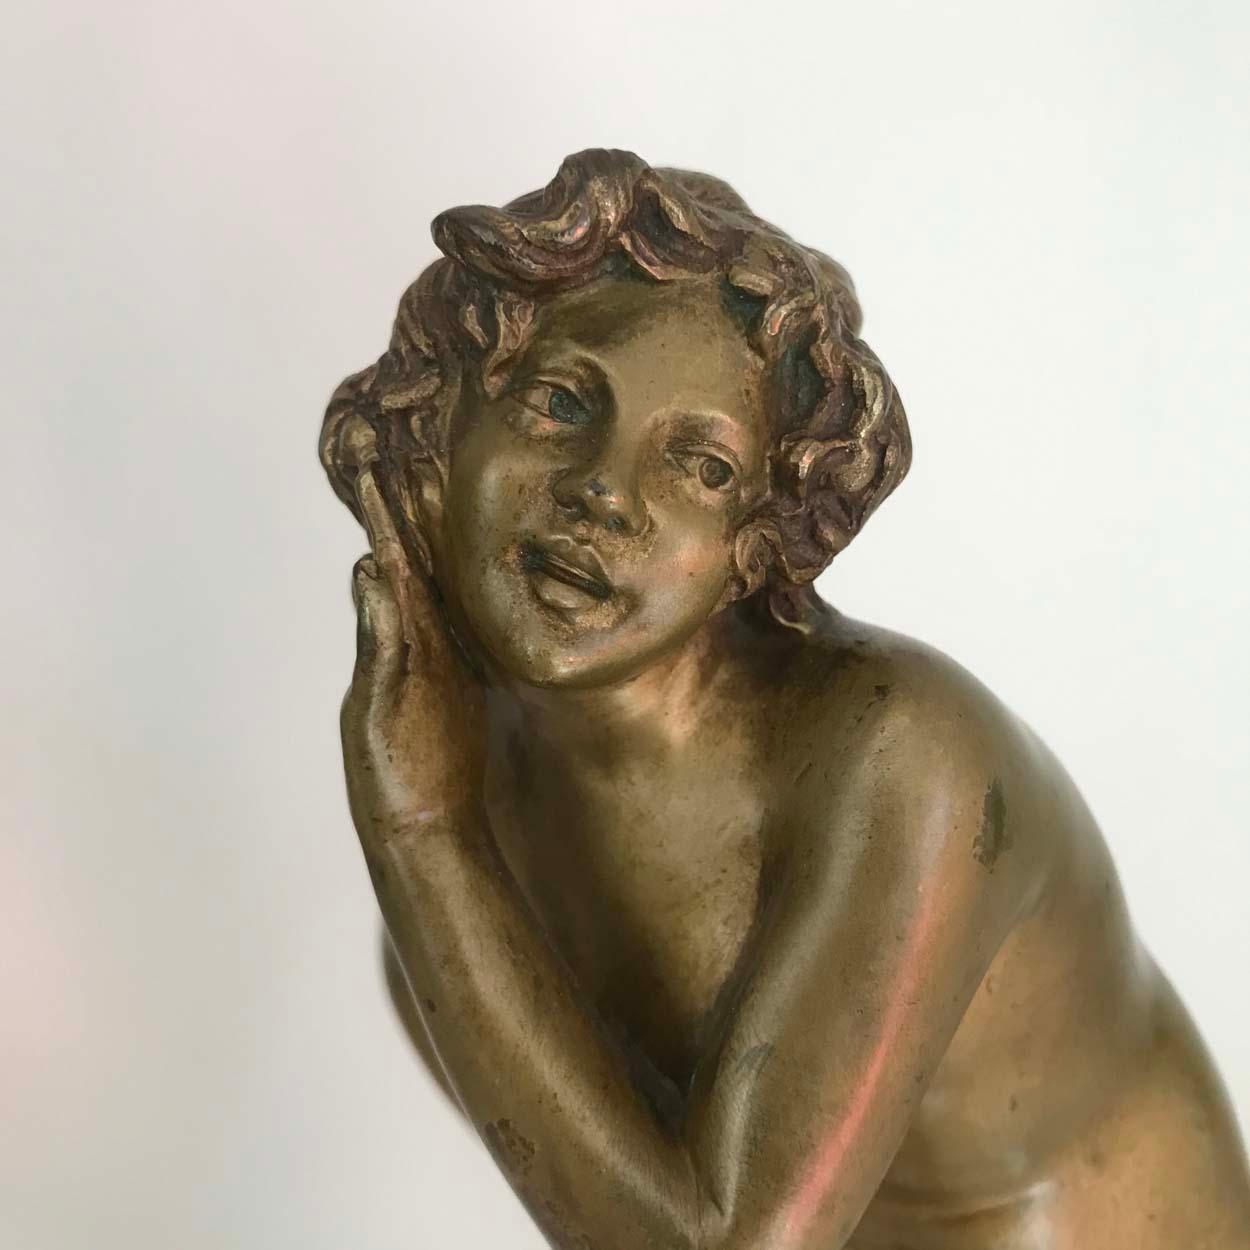 A beautiful small cast bronze figurine of a naked woman by Italian sculptor Raphael Nannini, mounted on a stepped veined marble base.

Raphaël Nannini was born in Florence and there executed bronzes and ivory figures for French foundries like Les